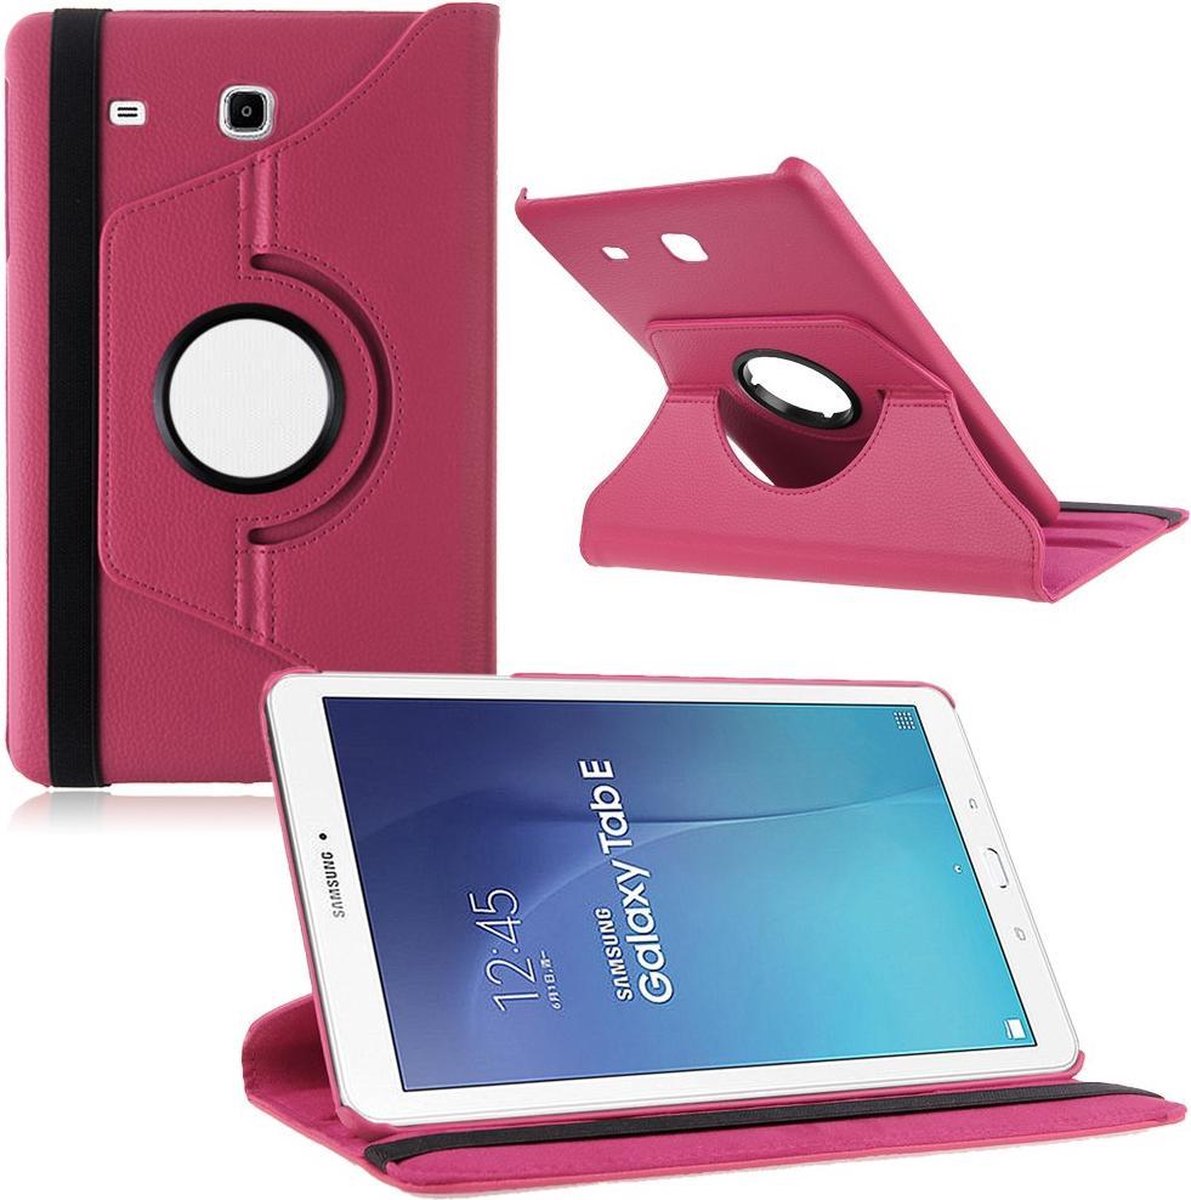 Samsung Galaxy Tab E 9.6 Inch SM - T560 / T561 Hoes Cover 360 graden draaibare Case Donker Roze